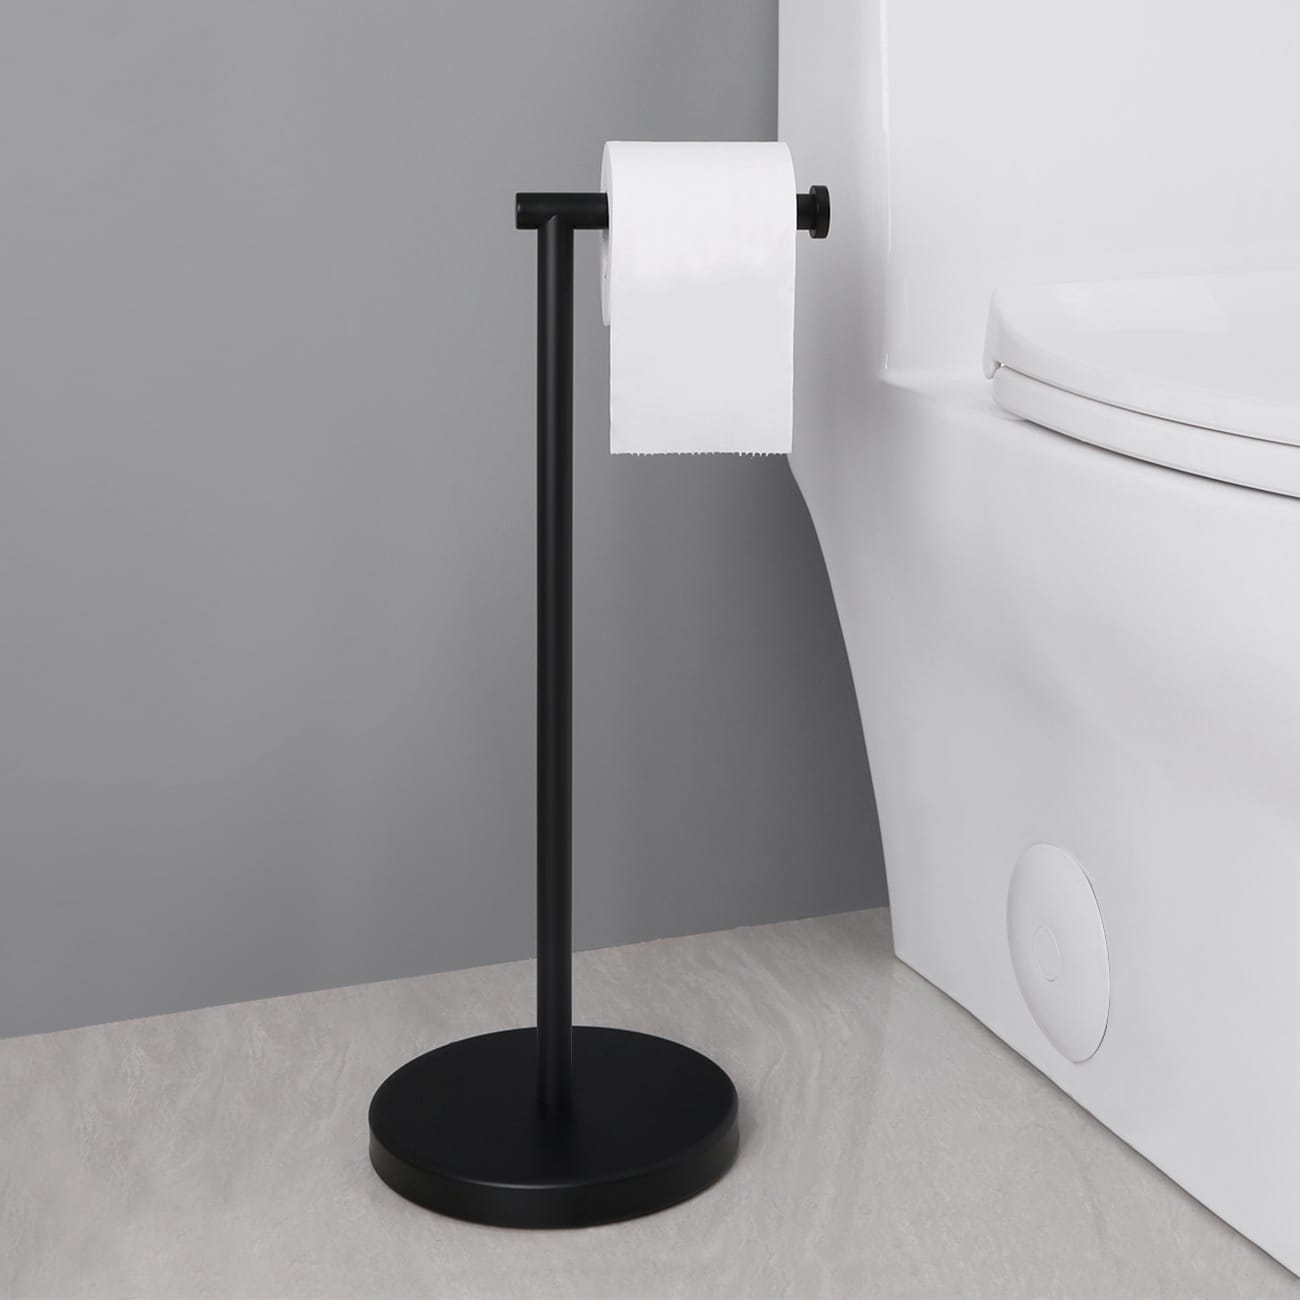 https://ak1.ostkcdn.com/images/products/is/images/direct/0c2fa1b6f8a54a298d98ba58a670320d0b7a542b/Freestanding-Toilet-Paper-Holder.jpg